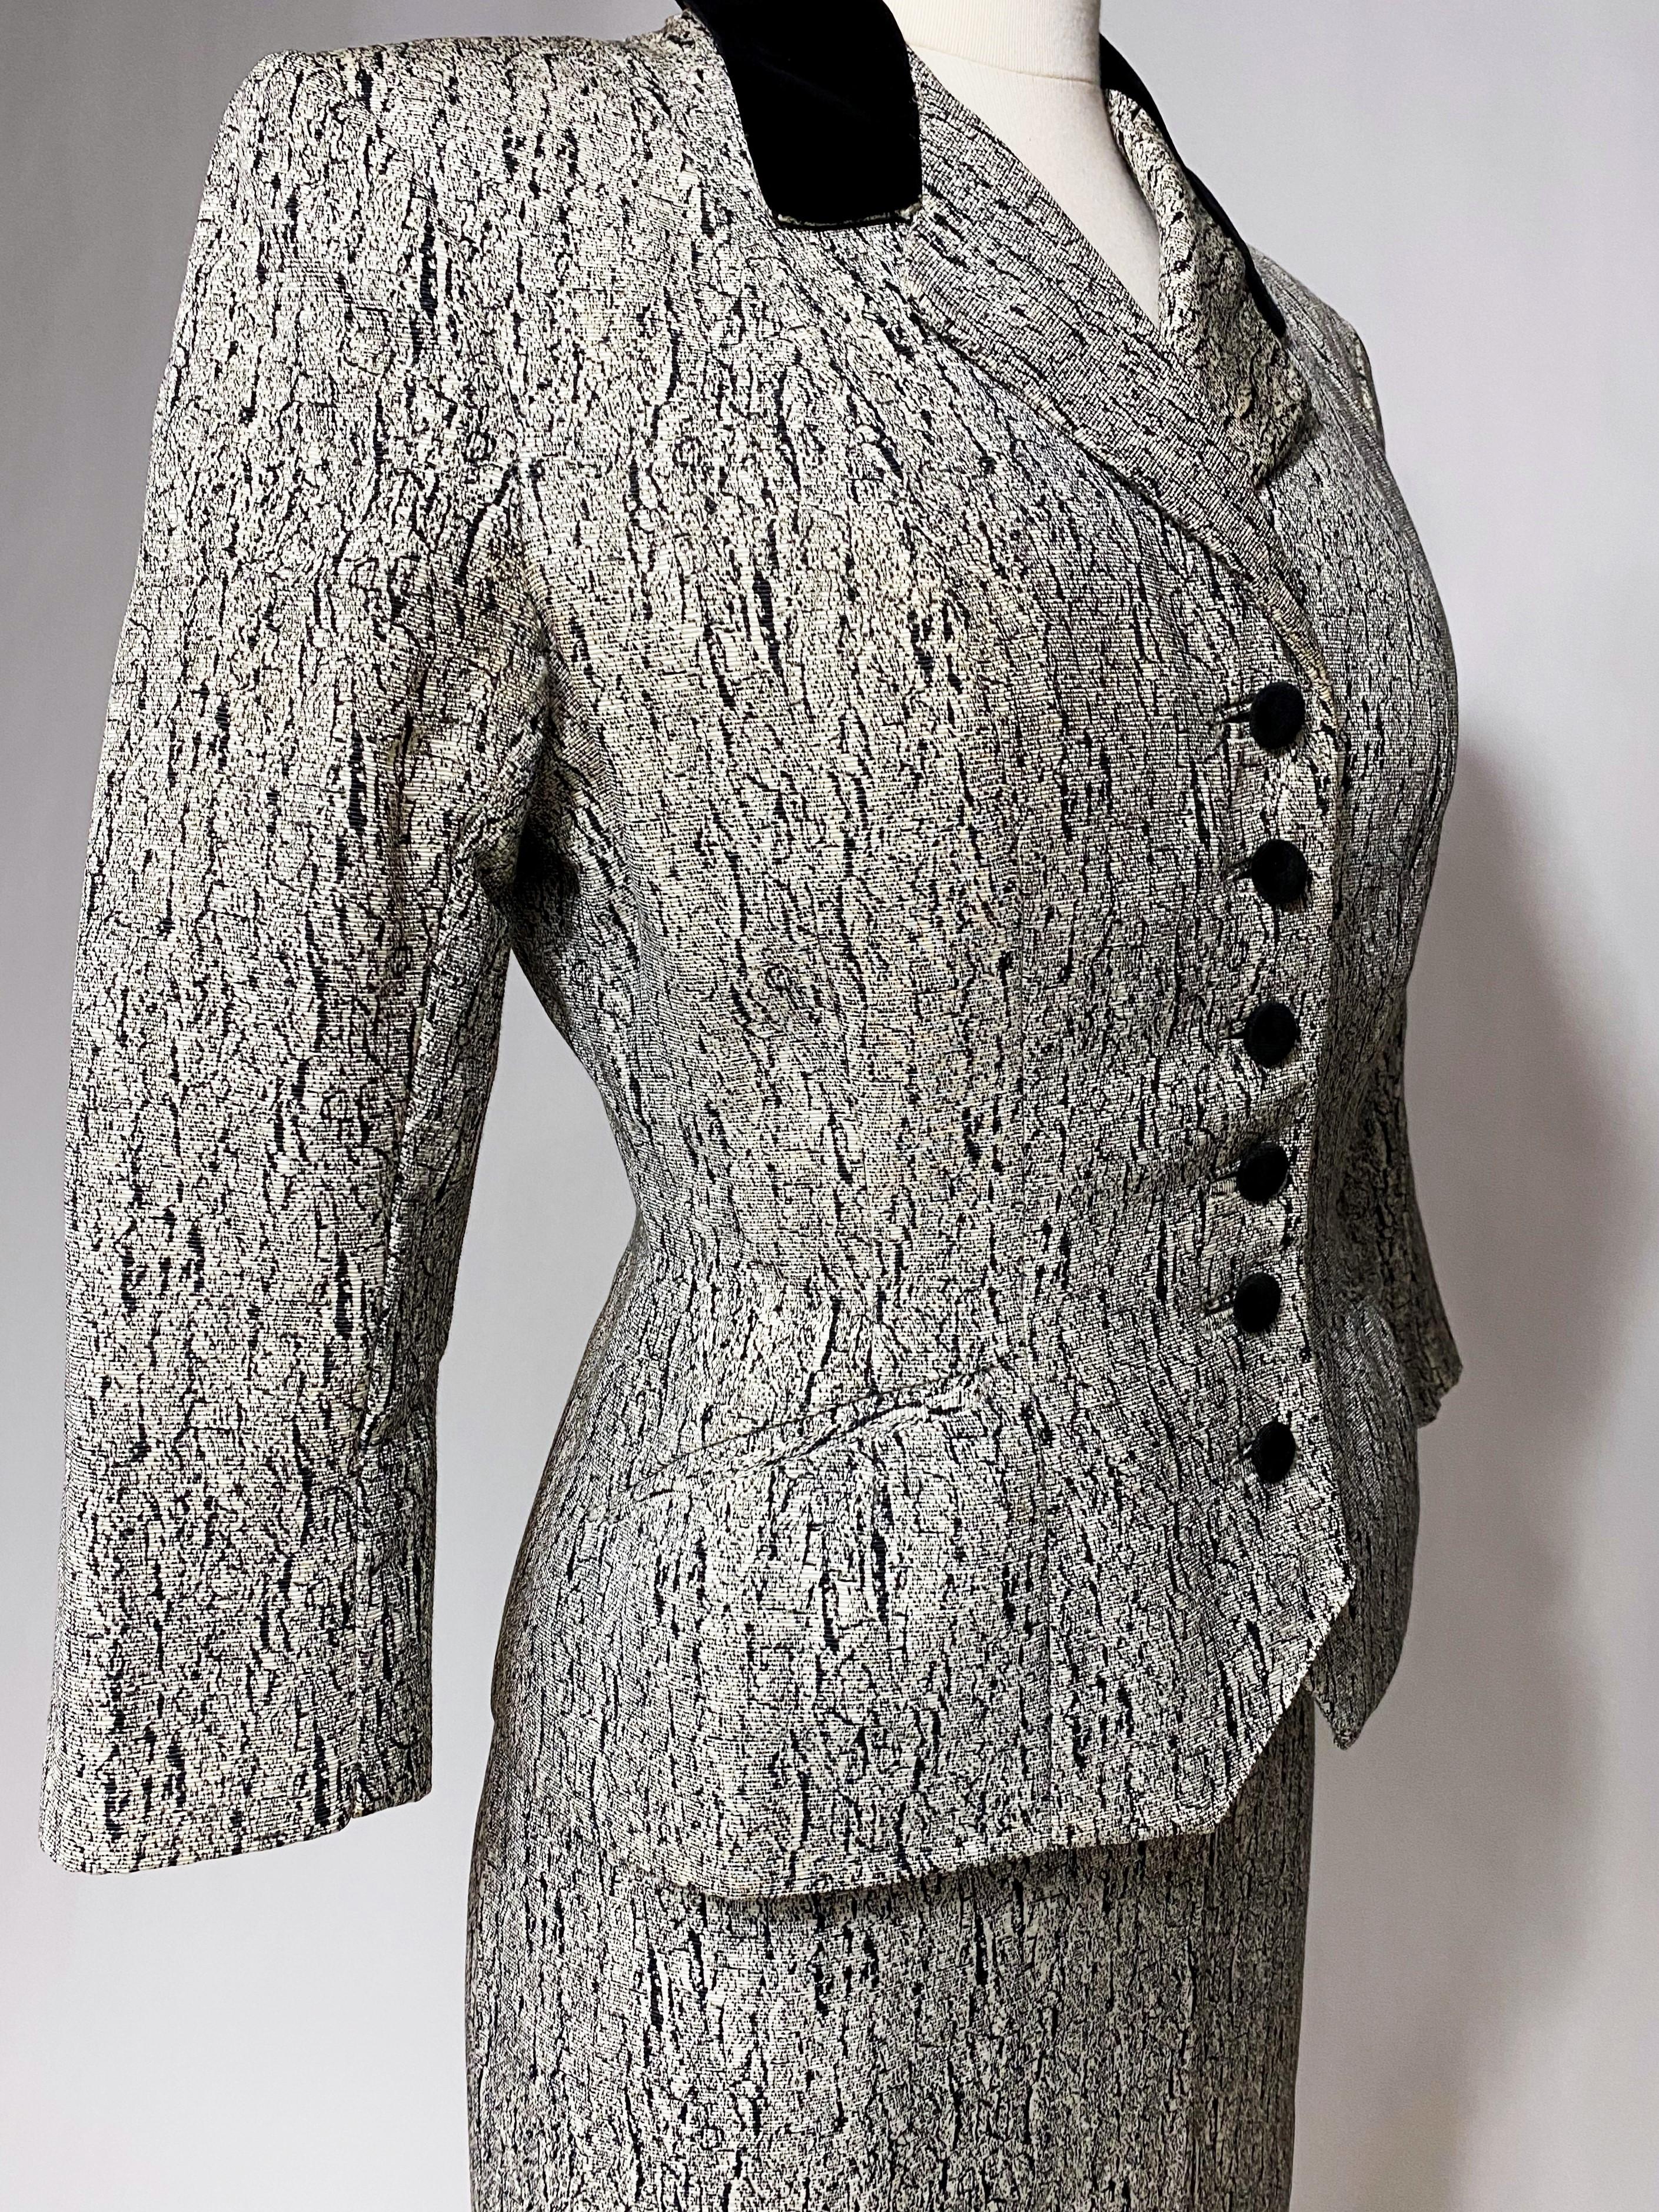 A Couture Bar skirt suit in marbled printed silk faille - France Circa 1947-1950 For Sale 1